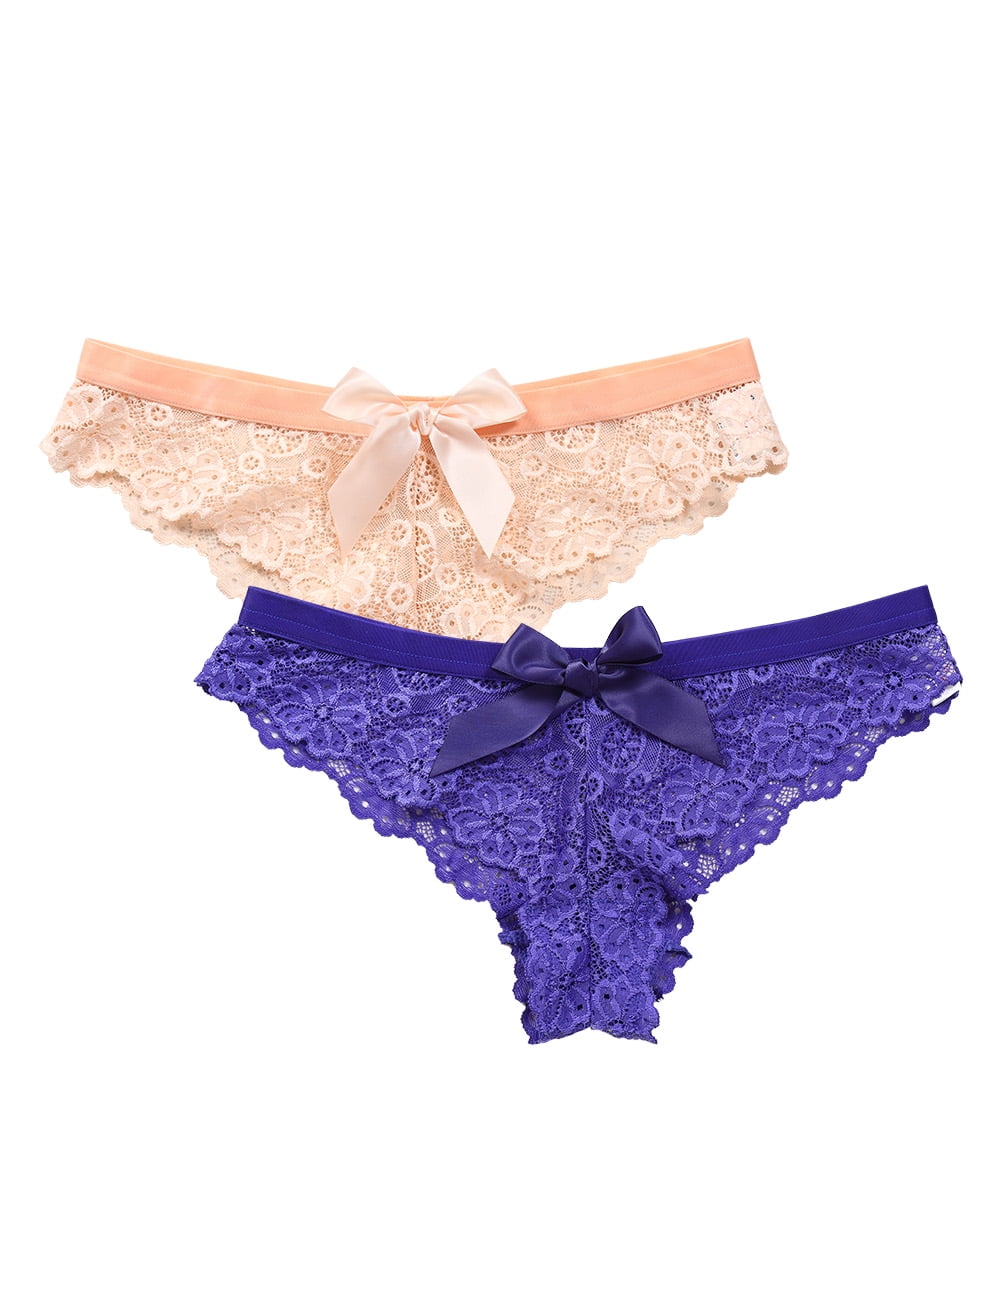 6 pc  LOW RISE SCALLOP EMBROIDERED LACE HIPSTER PANTIES UNDERWEAR LOT S-XL 